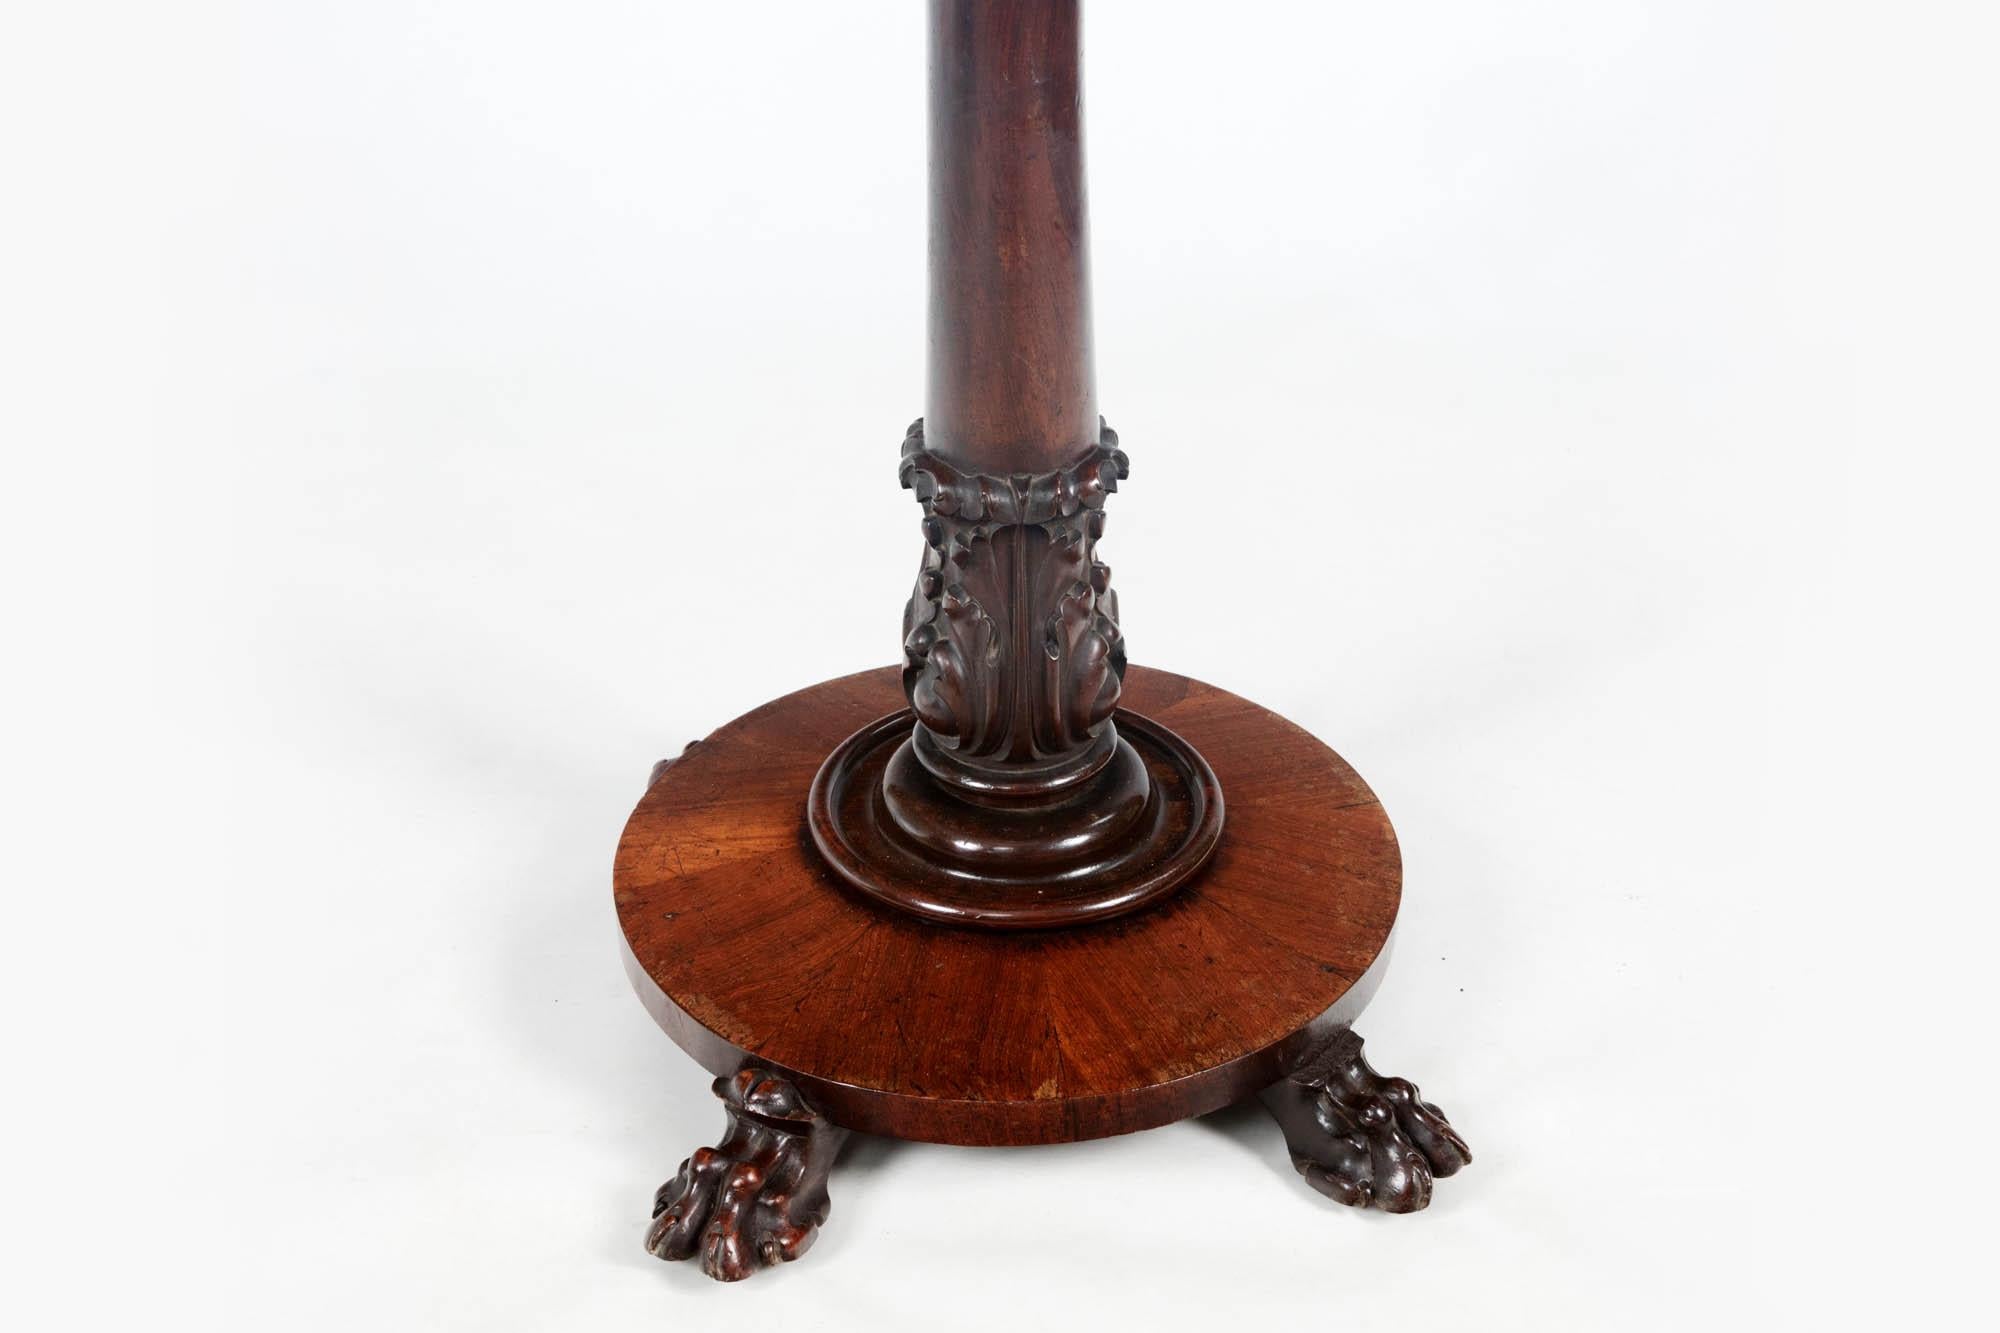 19th century occasional table with a rectangular top inlaid with stone specimens forming a decorative chevron pattern. It sits above an elegantly carved mahogany round pedestal pillar base with acanthus leaf decoration and four lion paw feet. Circa